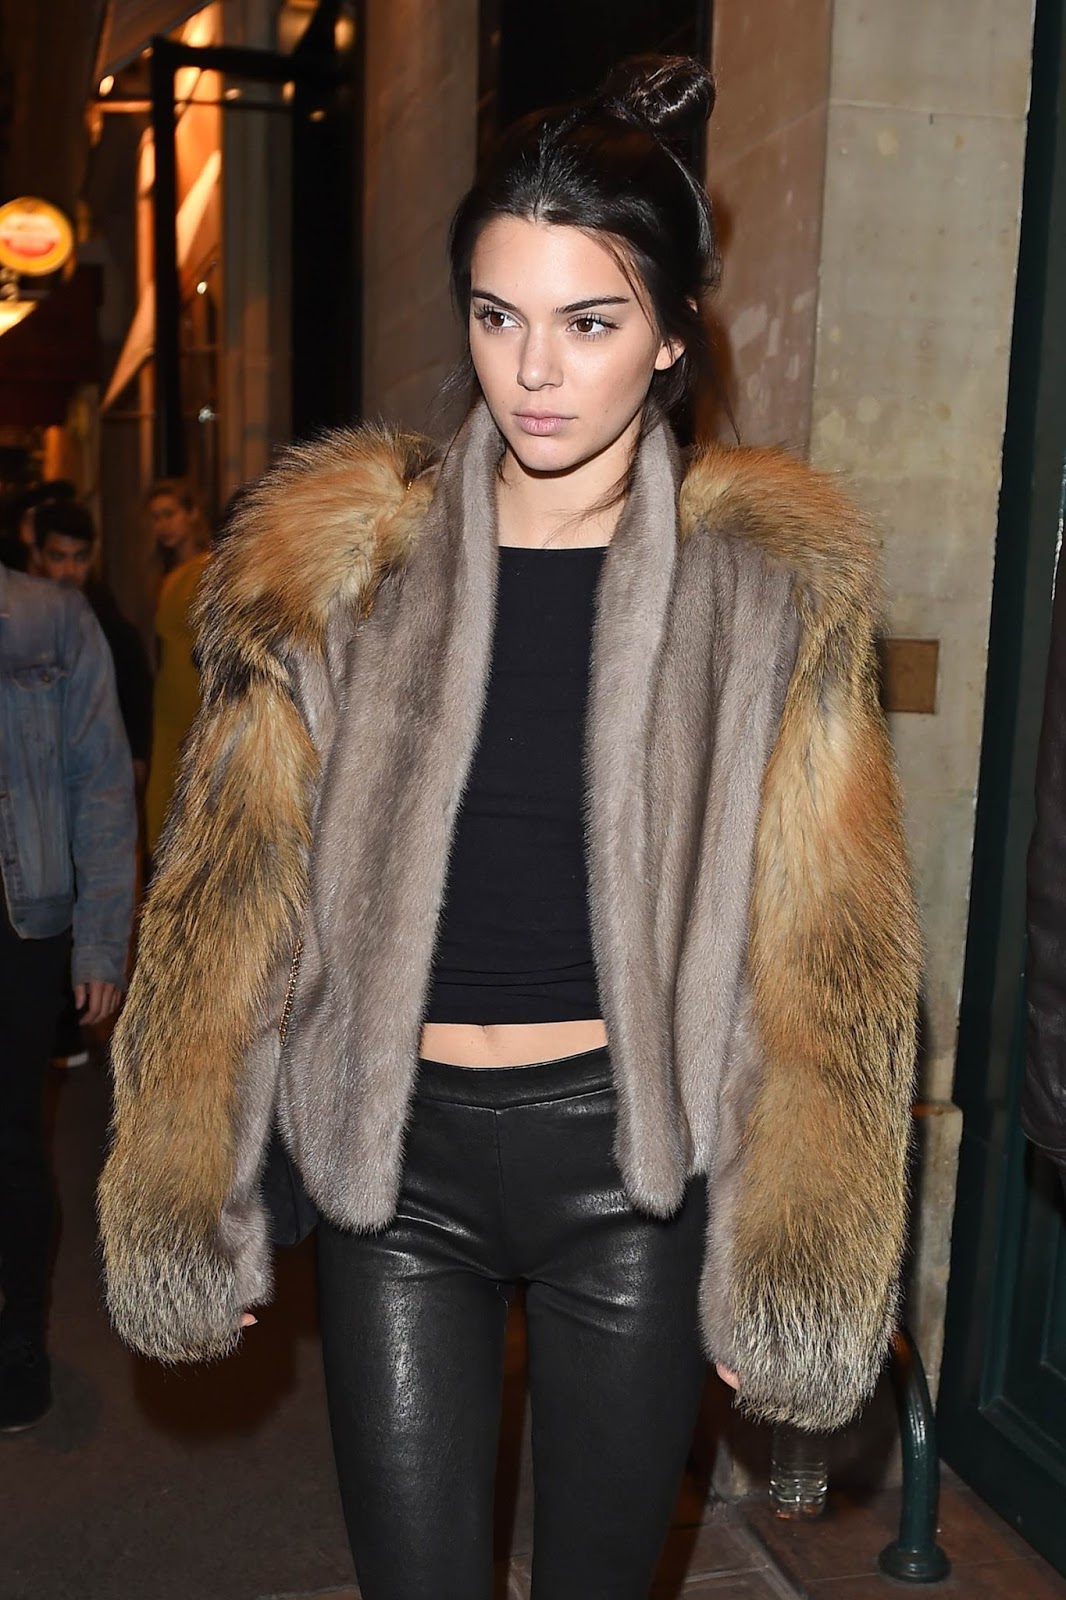 Lovely Ladies in Leather: We Love You Kendall Jenner